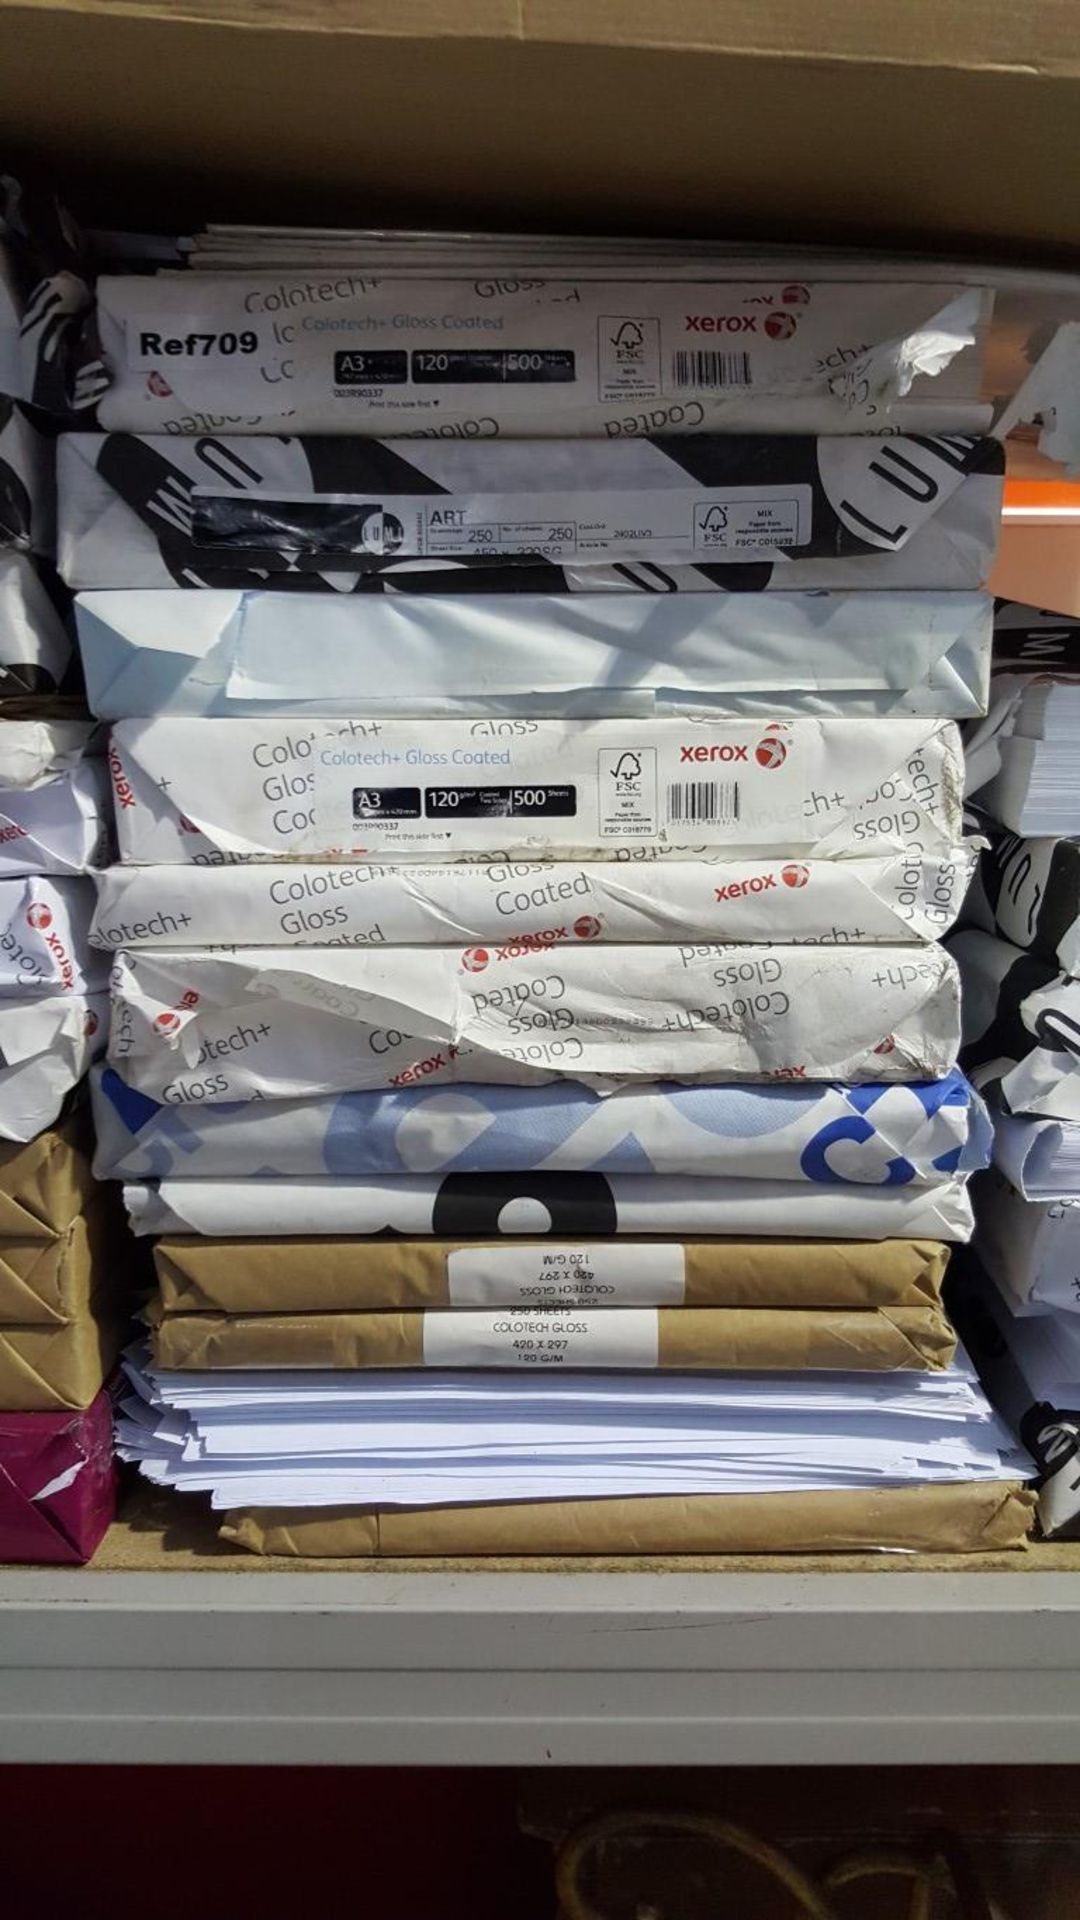 1 x Joblot Of Various Packs Of Paper (35+ Packs) - CL011 - Location: Altrincham WA14 - REF: Ref709 - Image 4 of 10